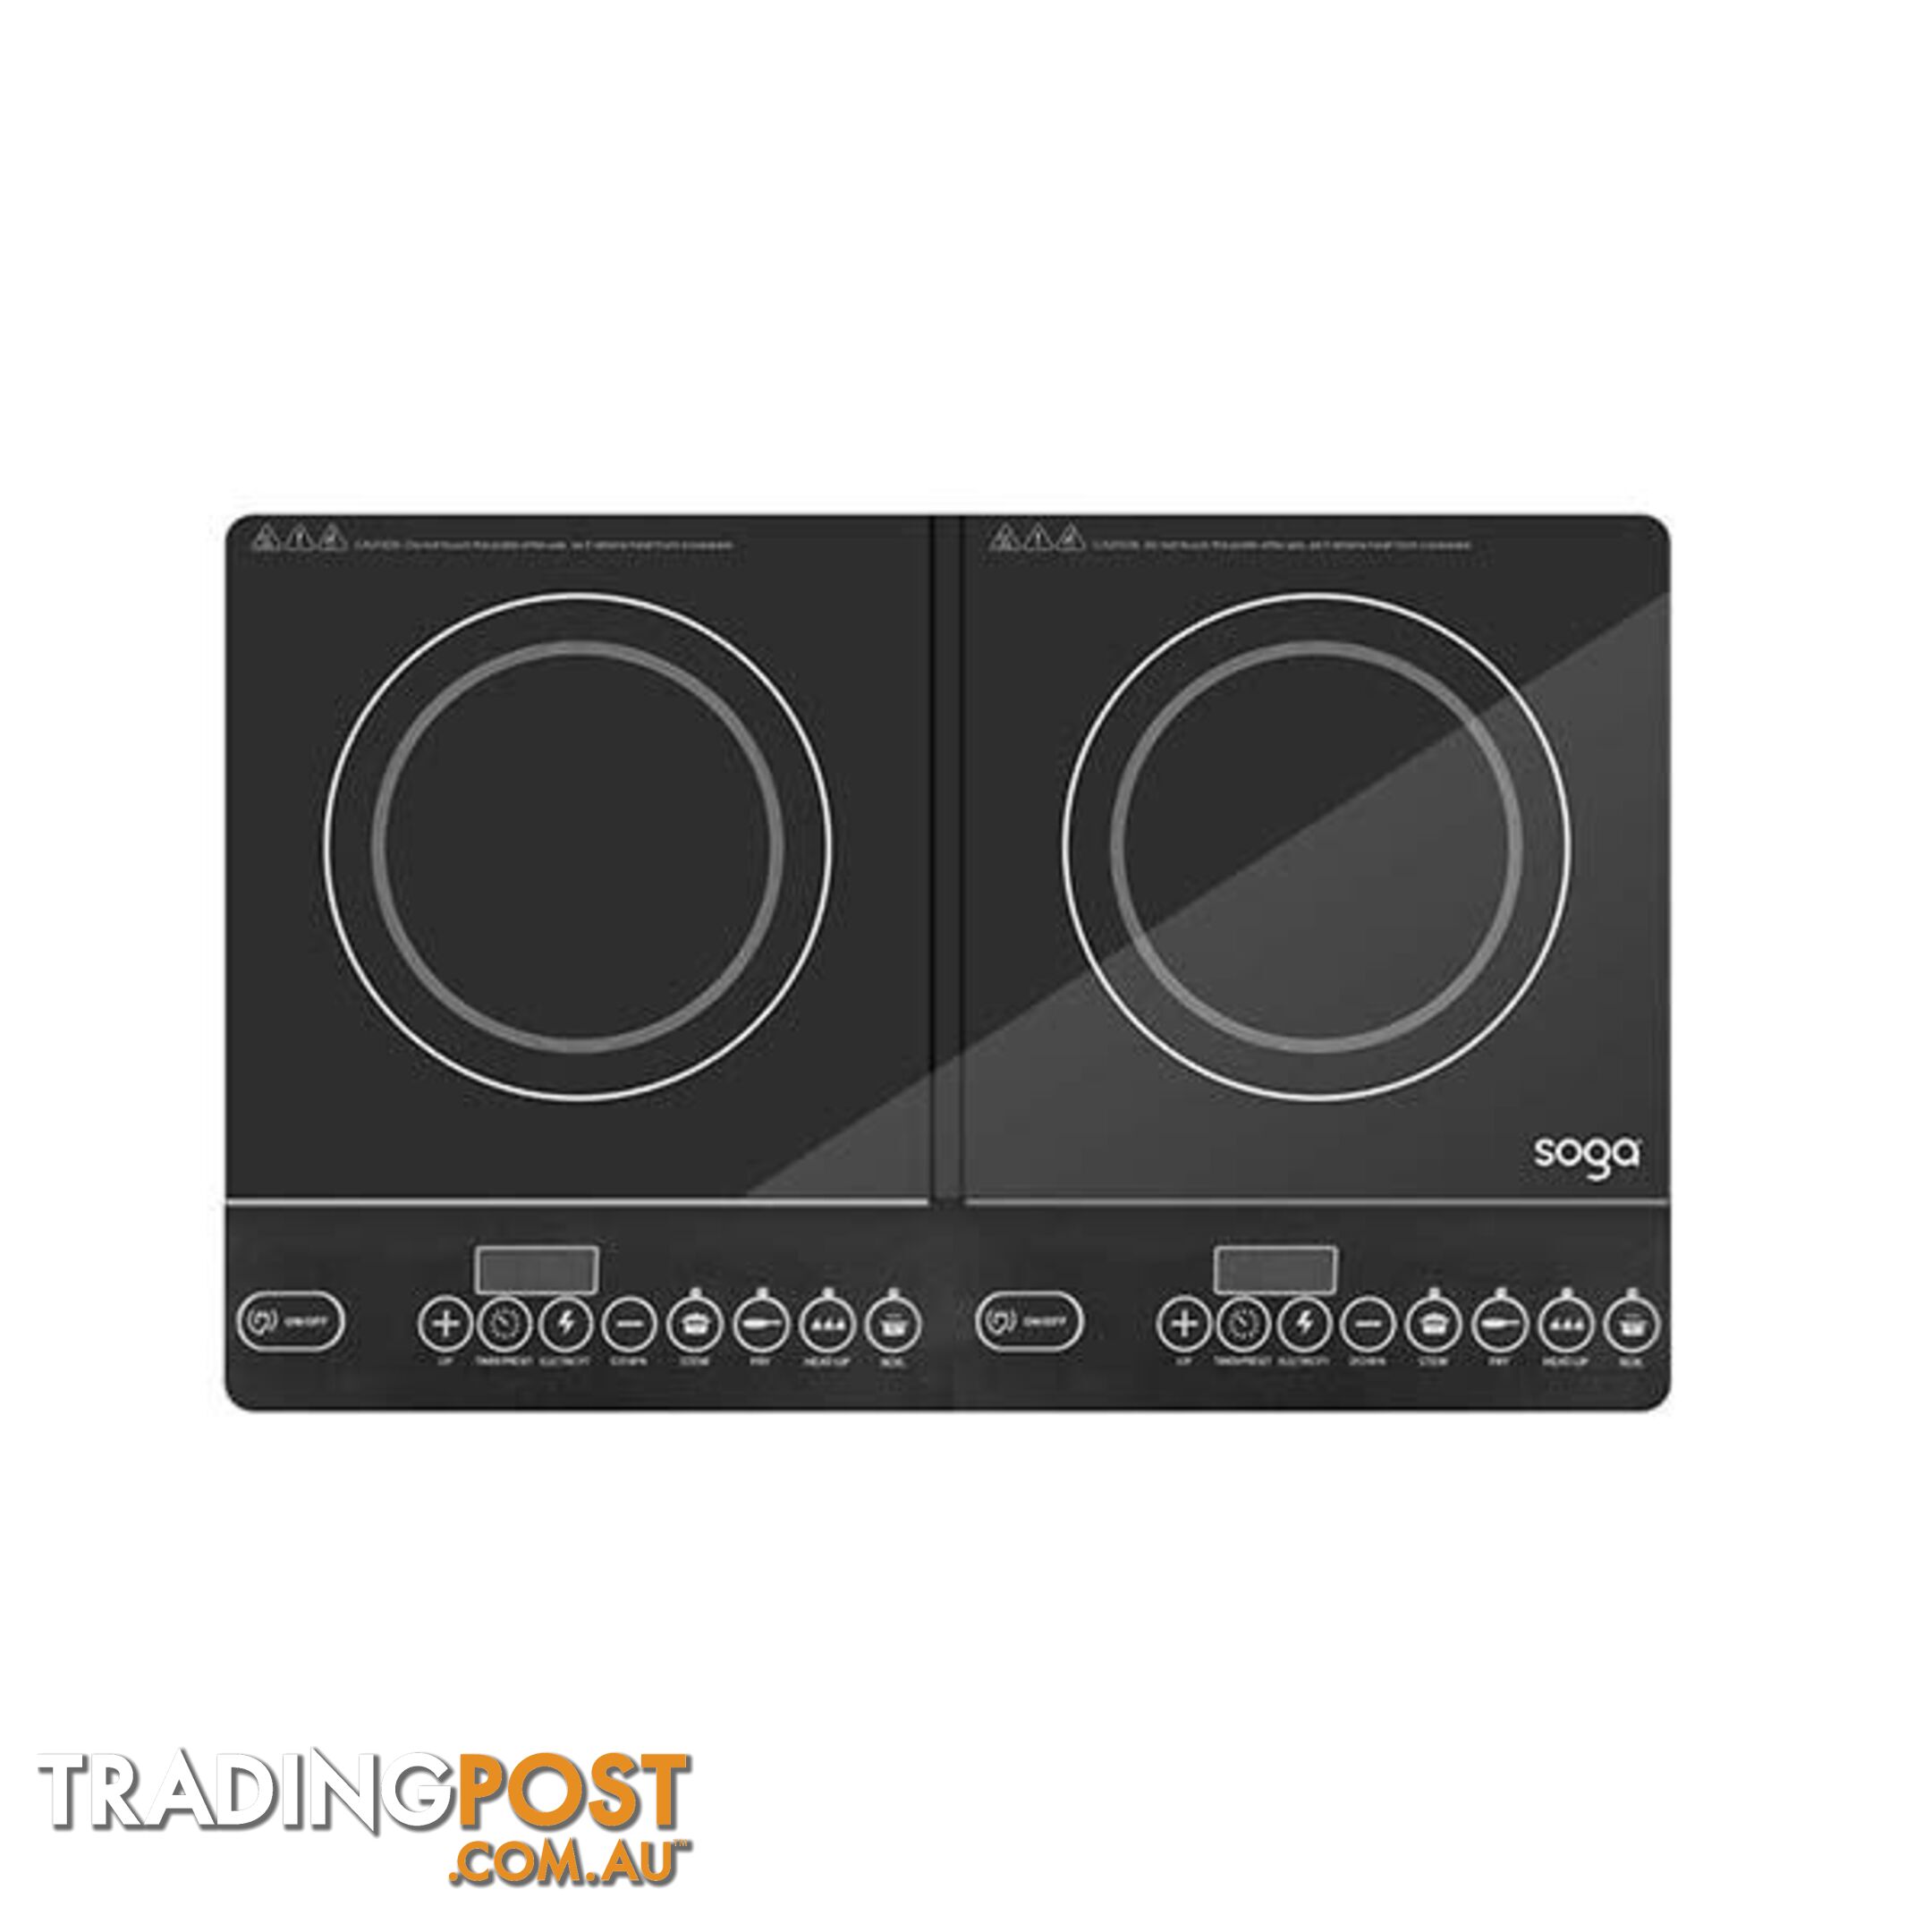 Soga Cooktop Portable Induction Led Electric Duo Burners Stove - Soga - 9476062089665